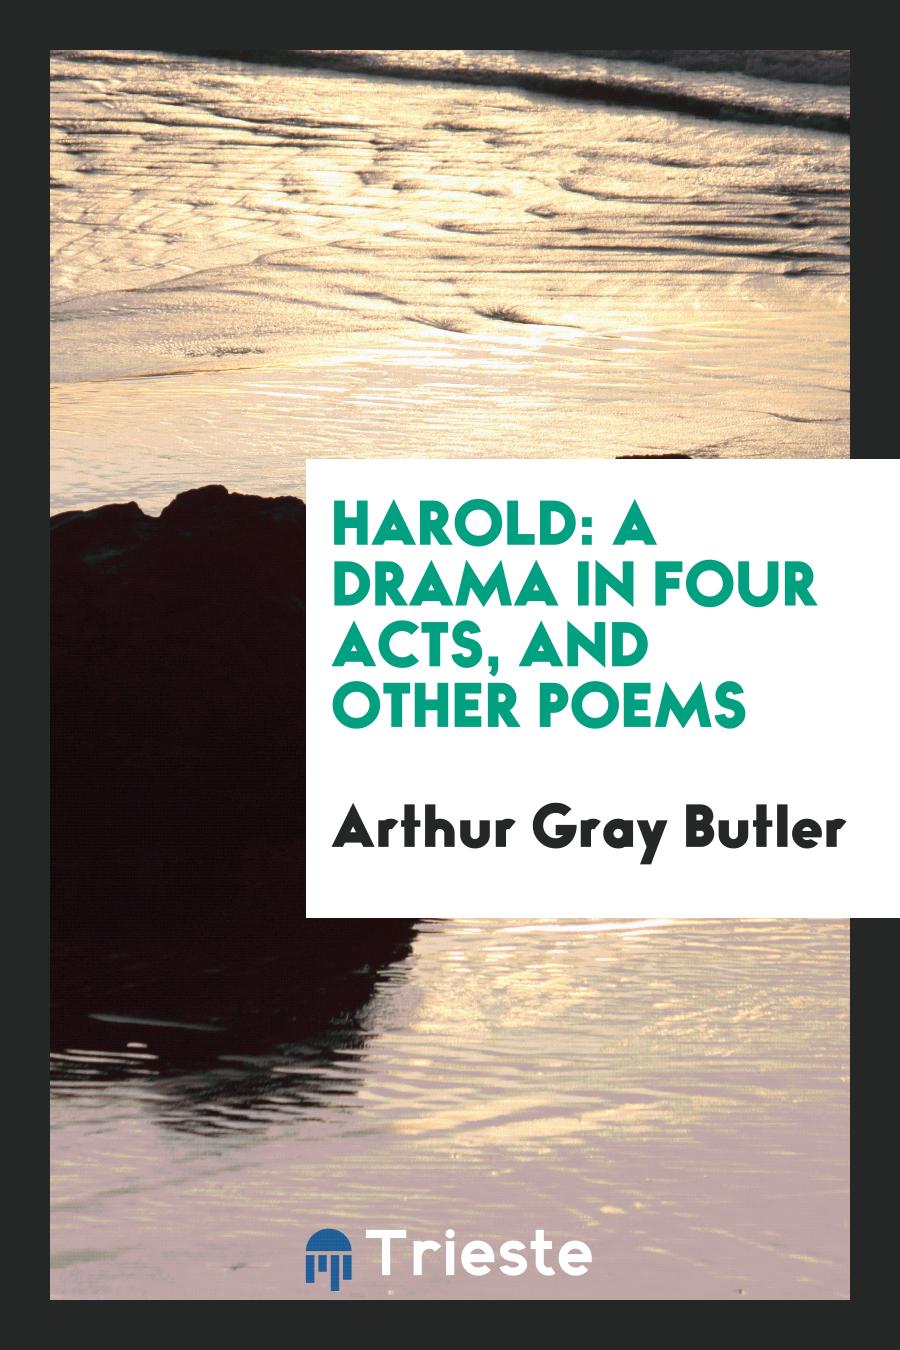 Harold: A Drama in Four Acts, and Other Poems